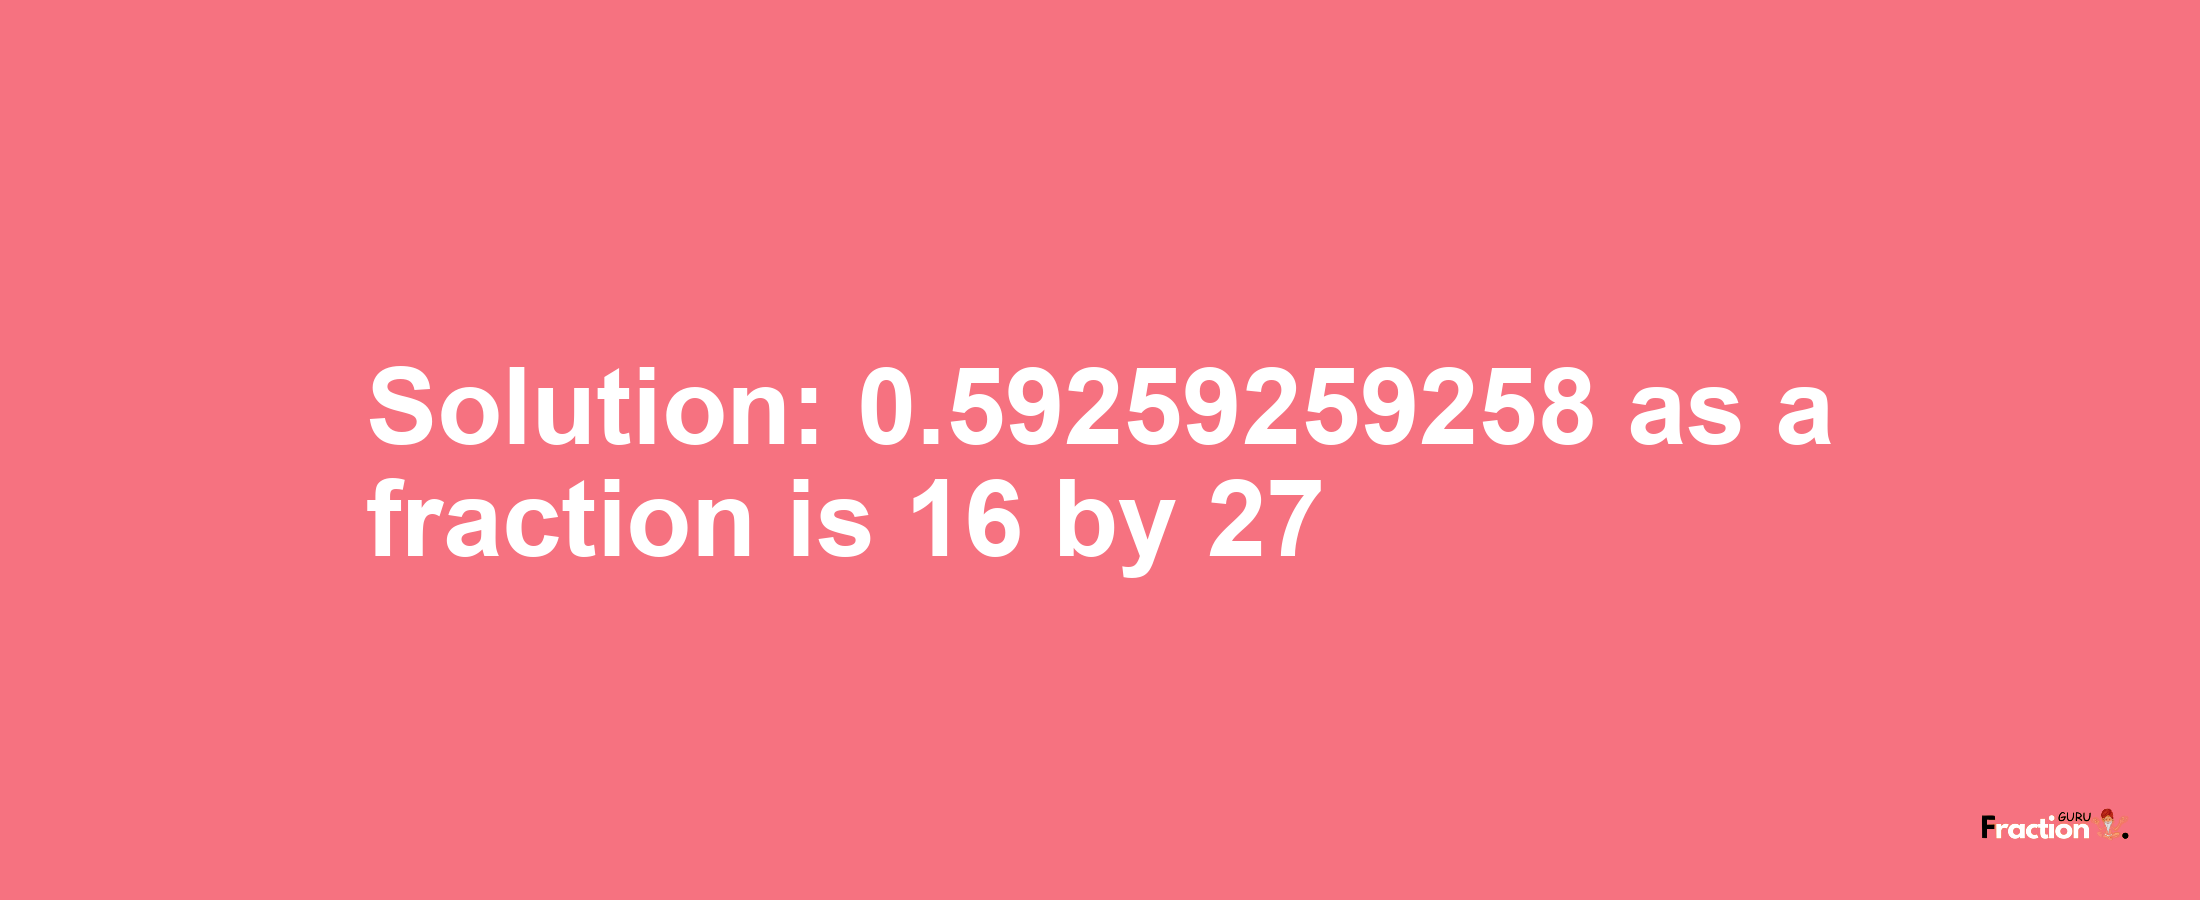 Solution:0.59259259258 as a fraction is 16/27